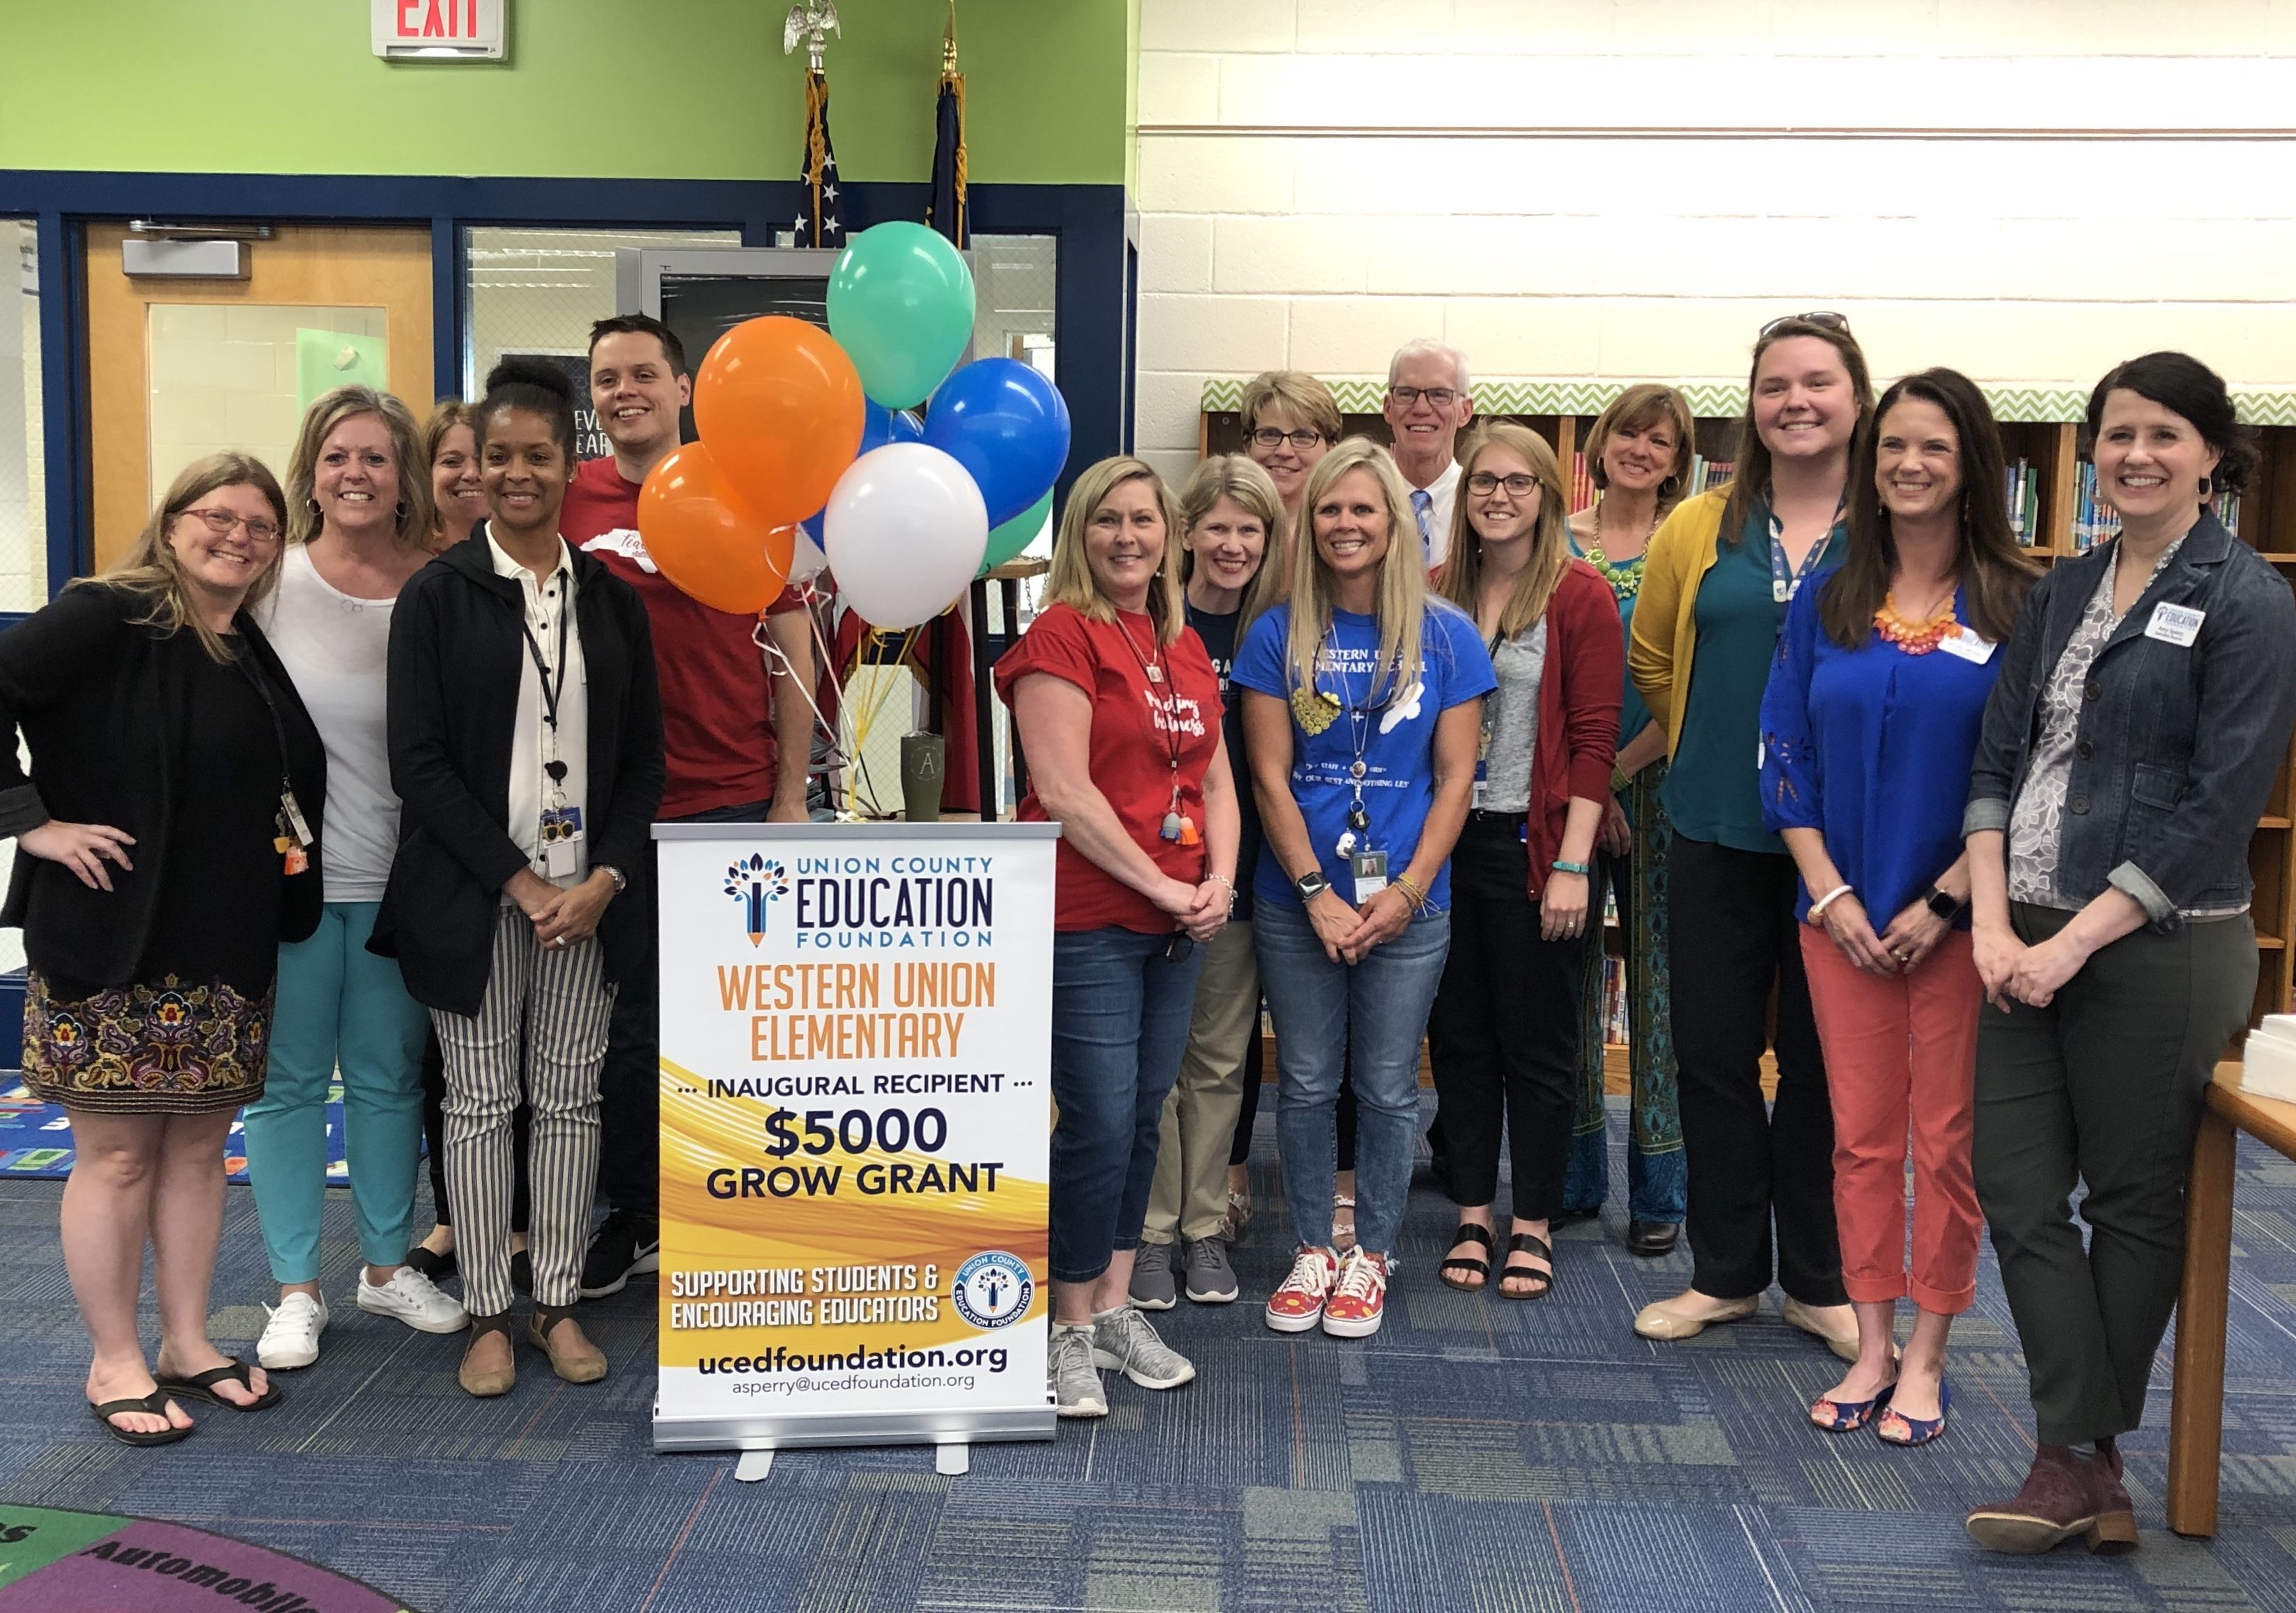 The First GROW grant awarded to Western Union Elementary